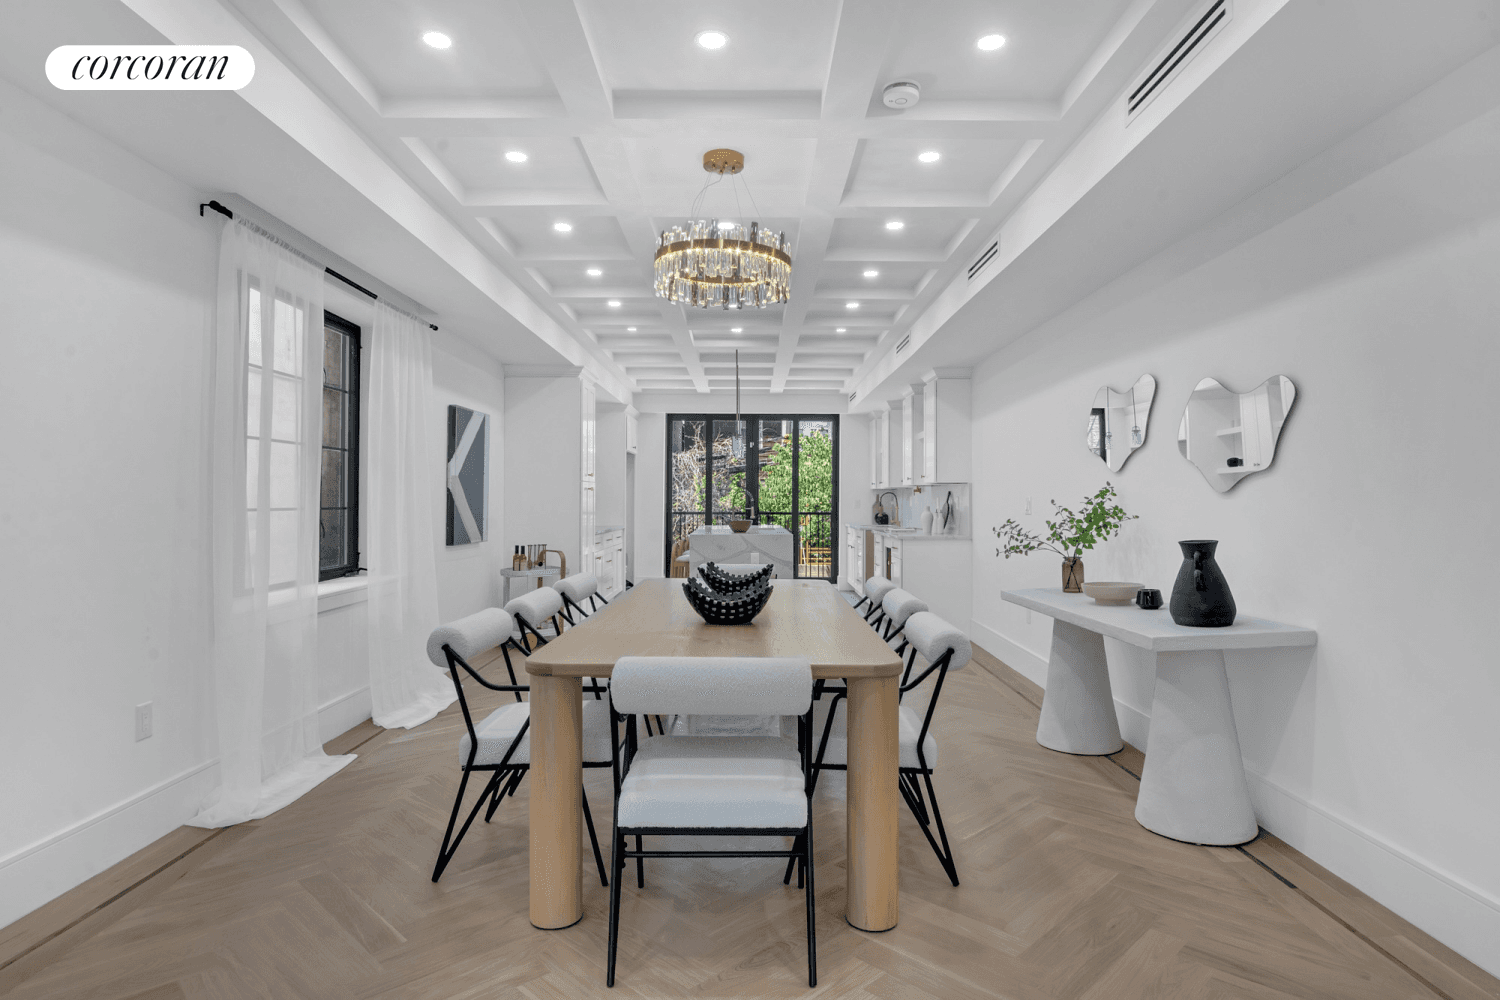 Welcome to 389 Fenimore Street, a meticulously gut renovated two family home with driveway and automatic garage door parking located in the heart of leafy Prospect Lefferts Gardens, Brooklyn.